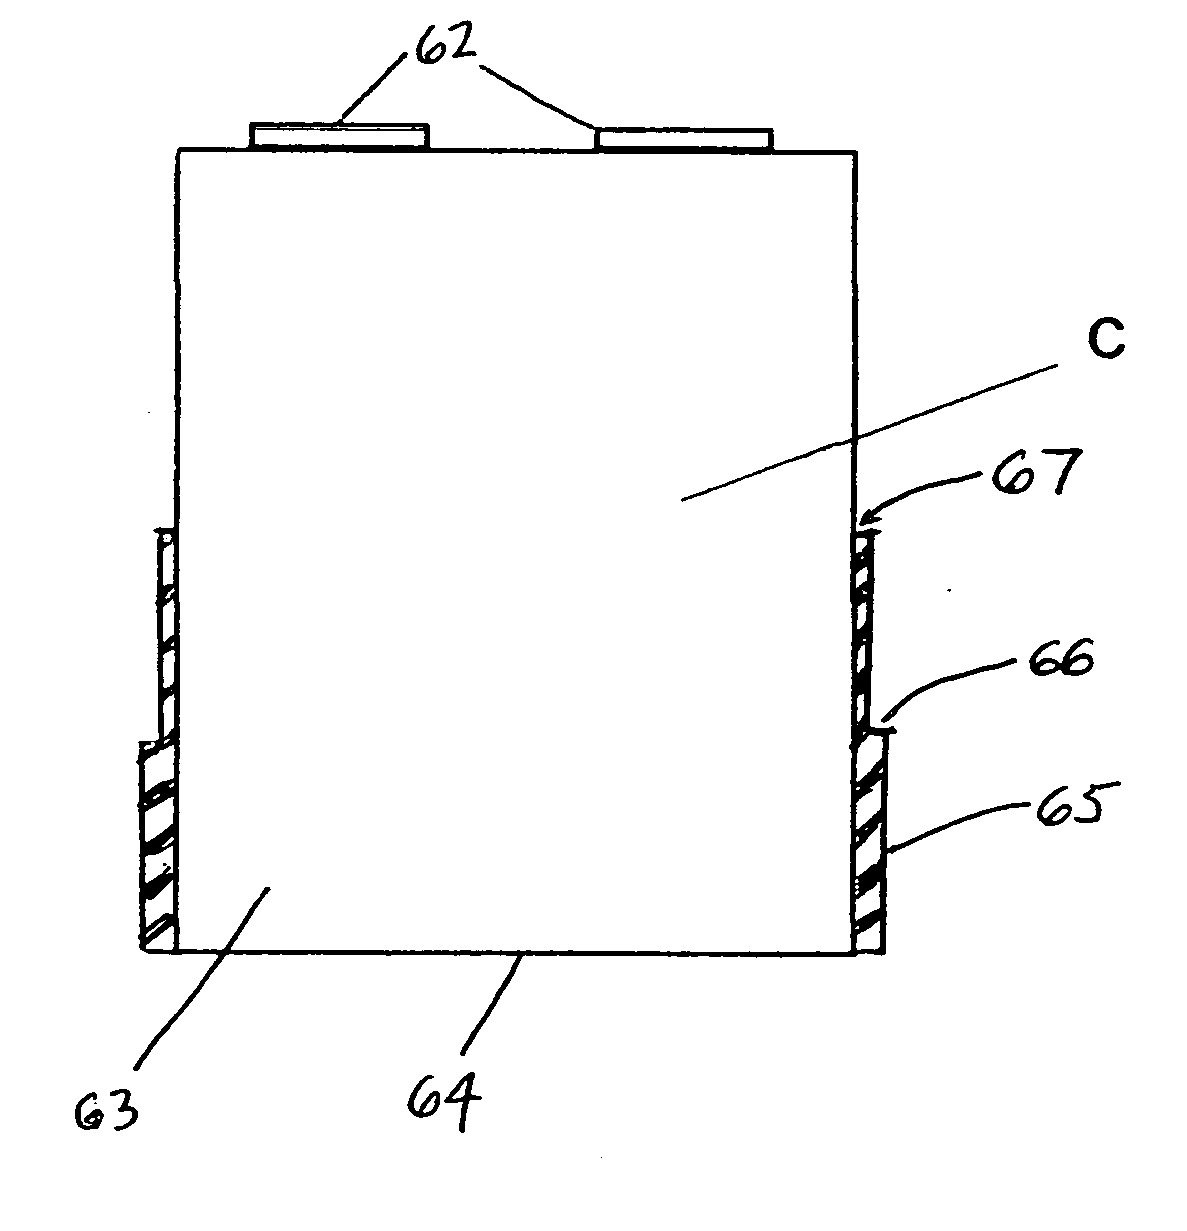 Mounting device for a capacitor